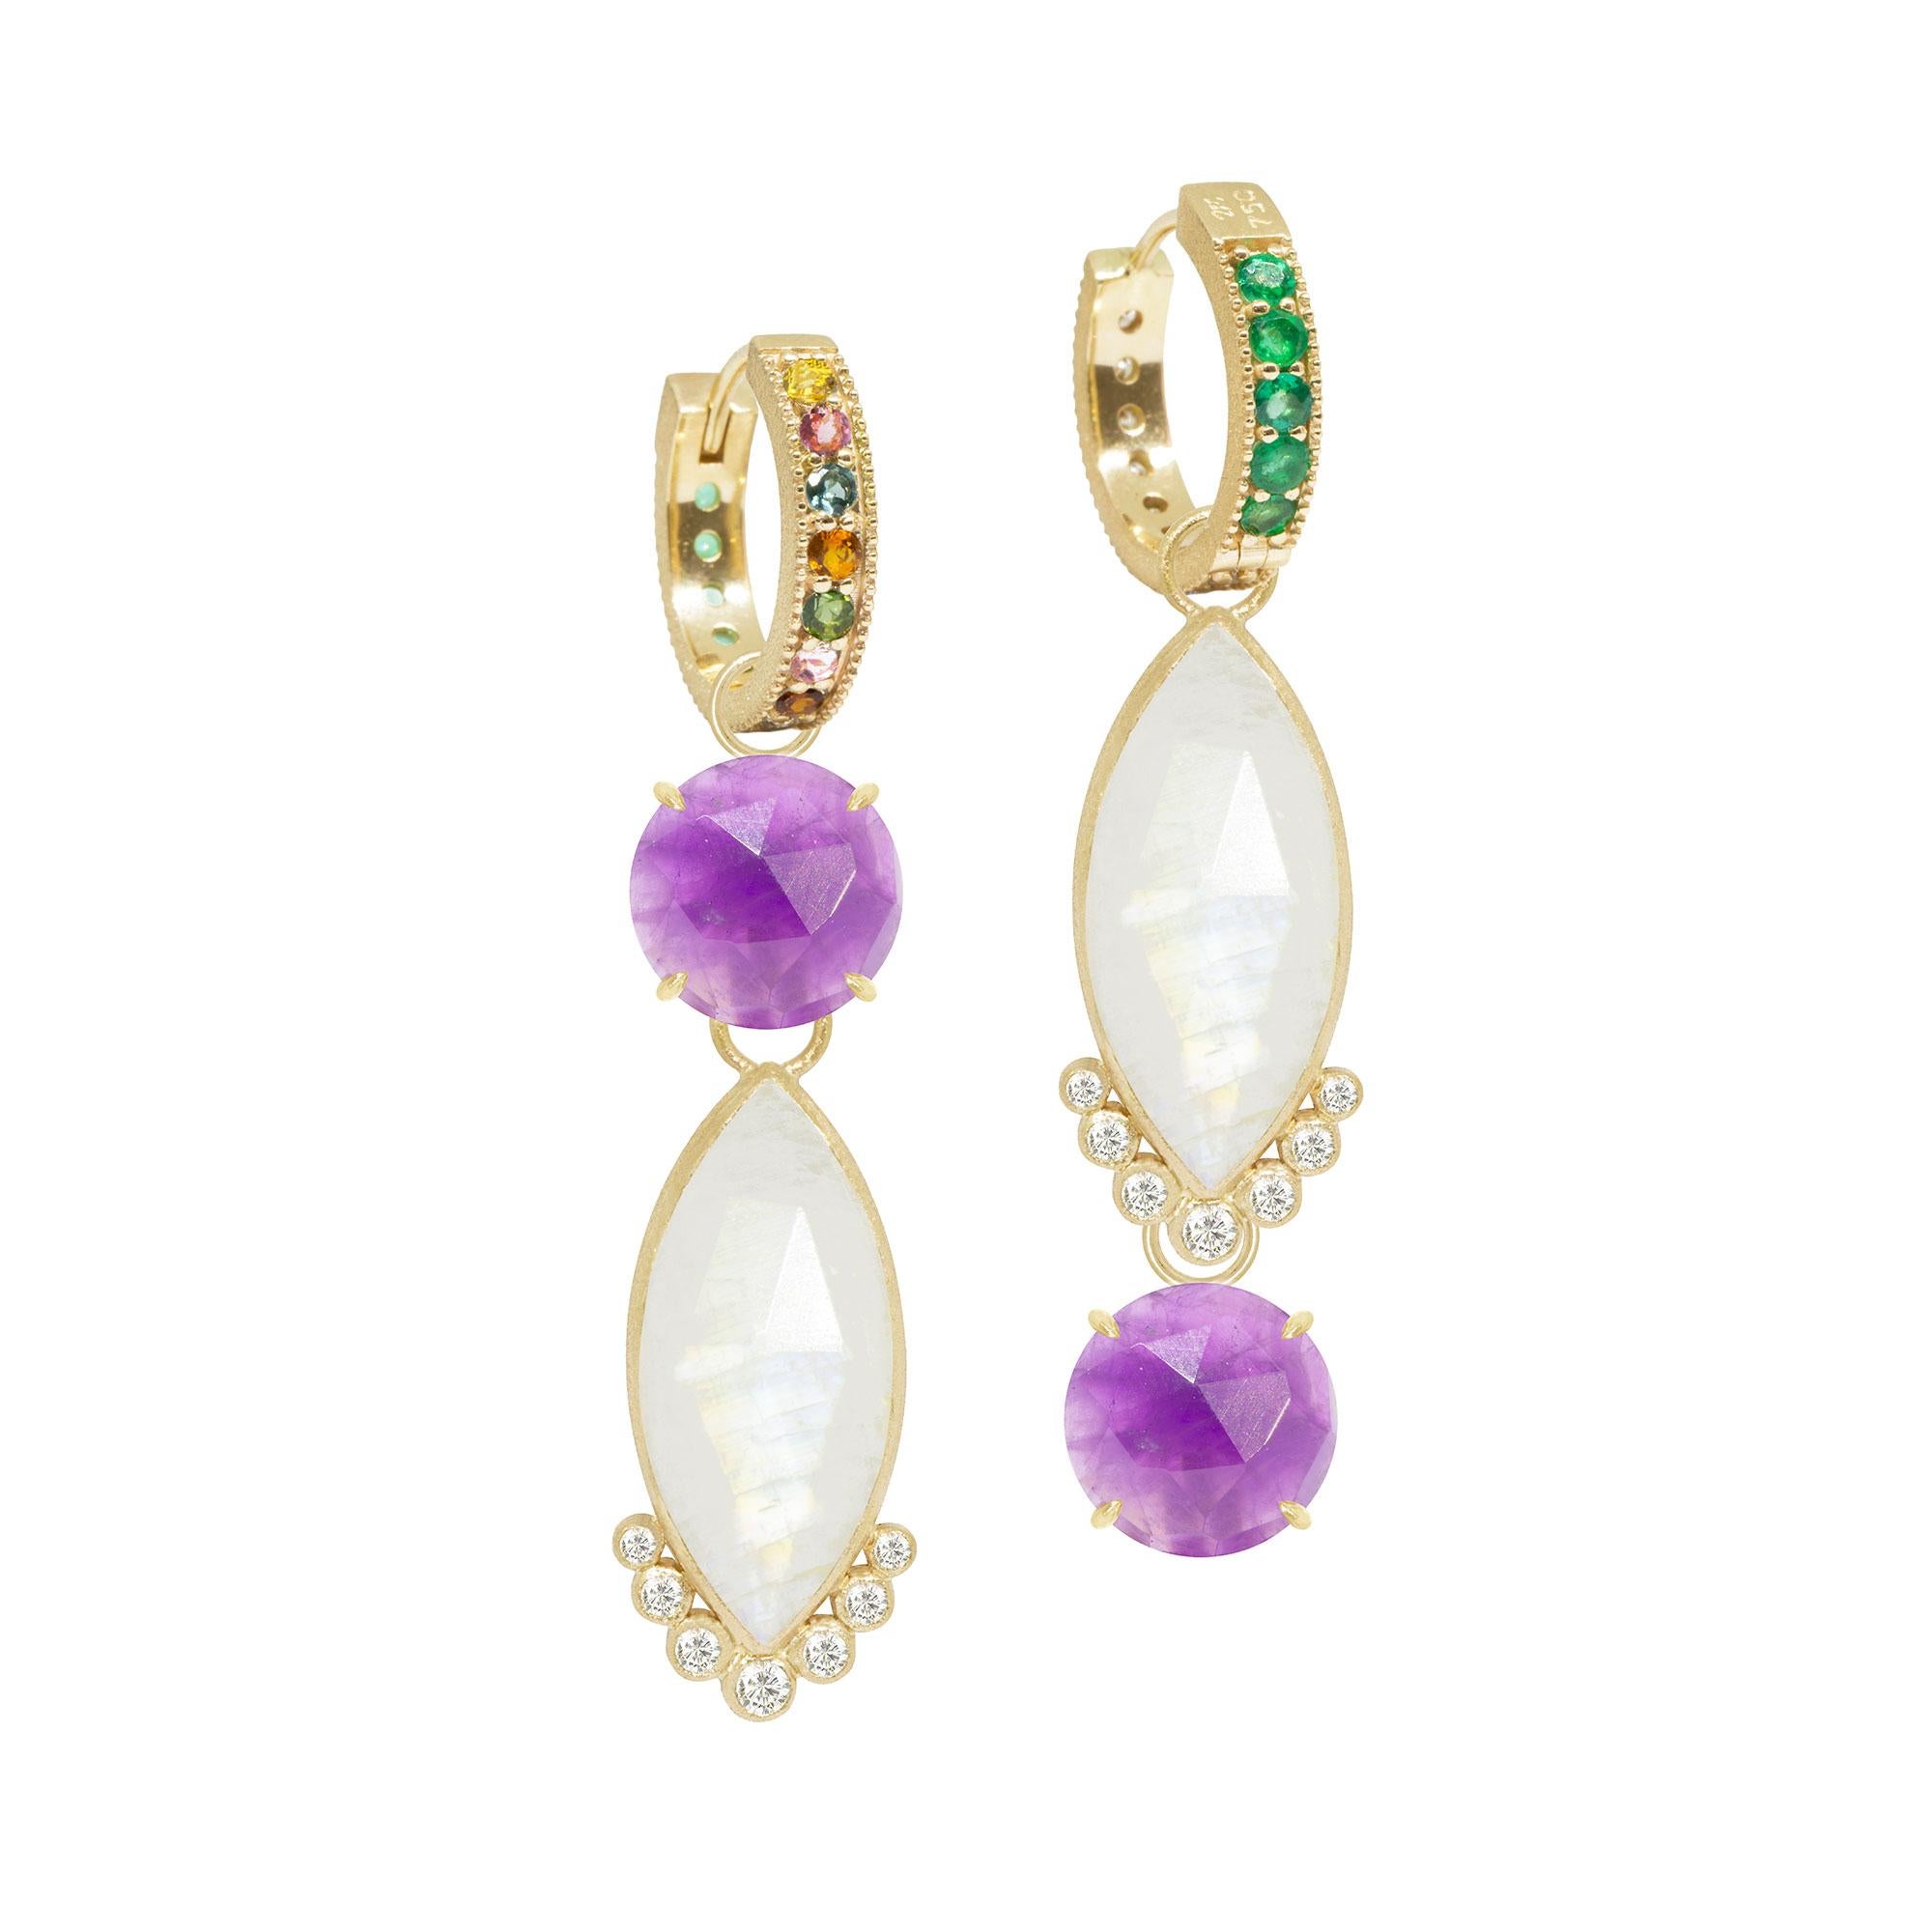 A natural complement to your personal style: Made with amethyst, these sweet, simple prong-set Petal Charms add a pop of color to any of our hoops.

Tourmaline for day, emeralds for a night out: We designed a version of popular petite hoop that’s